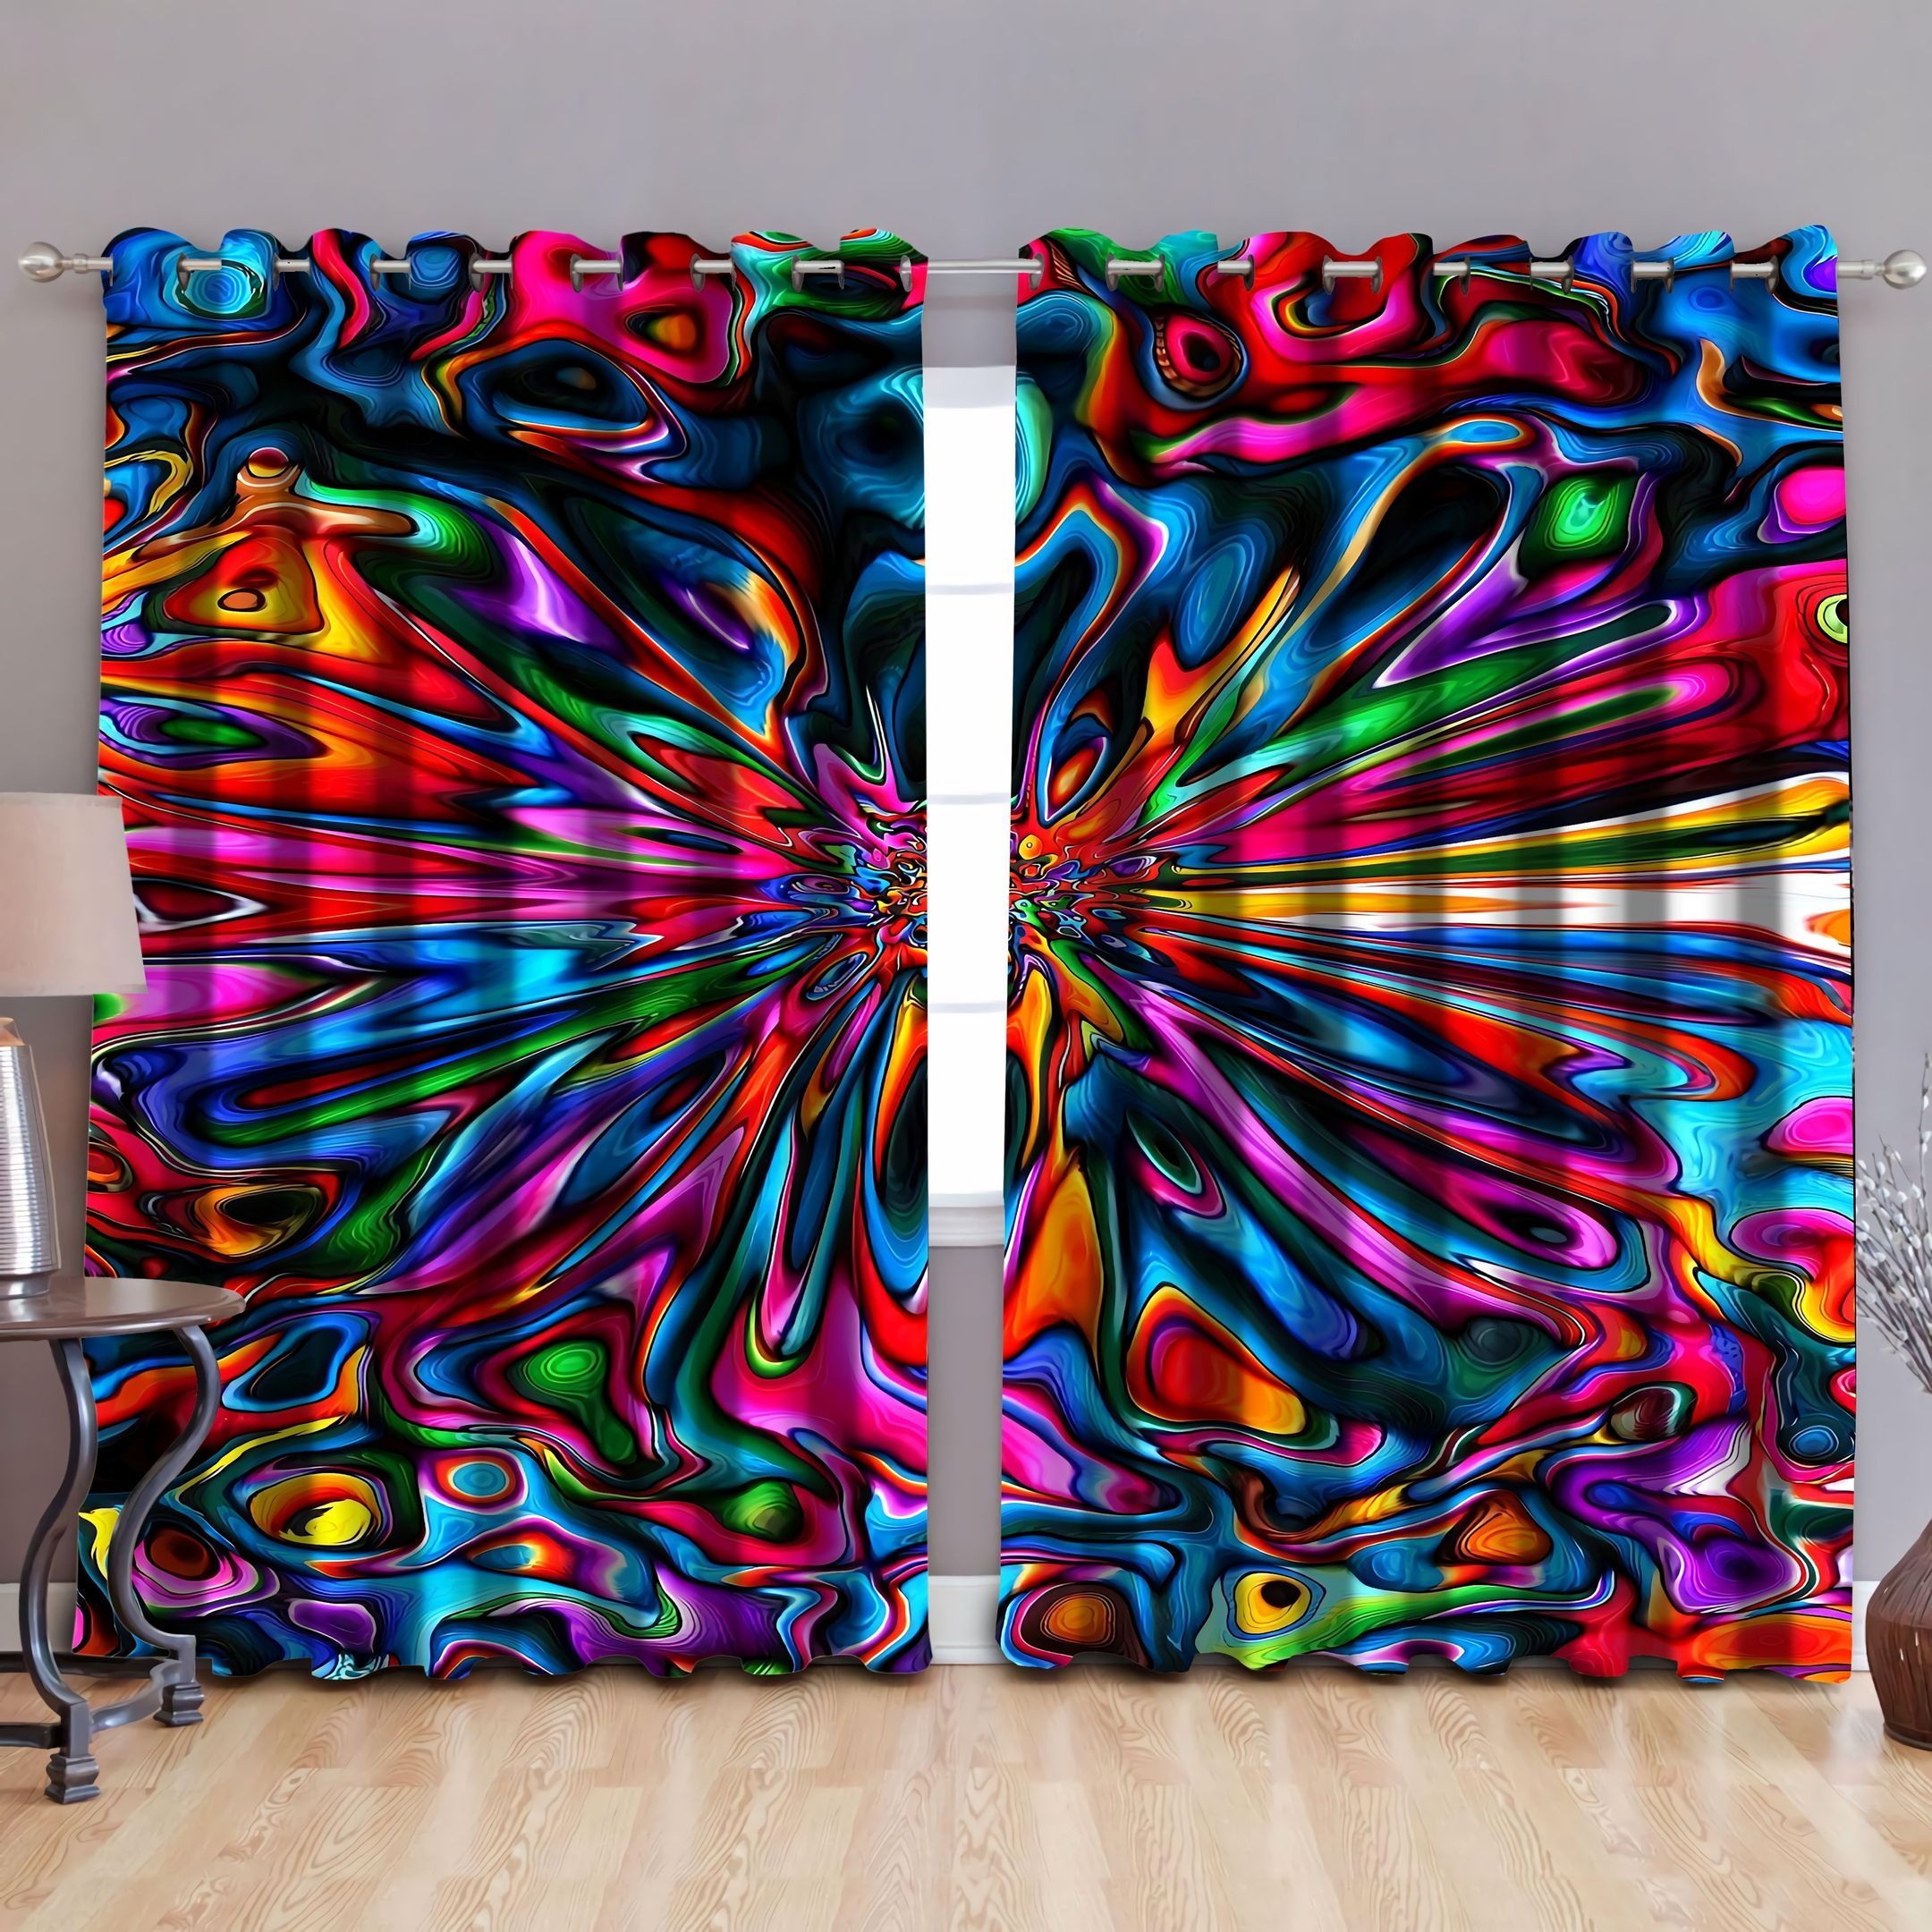 Hippie Lover Colorful Window Curtains Home Decor